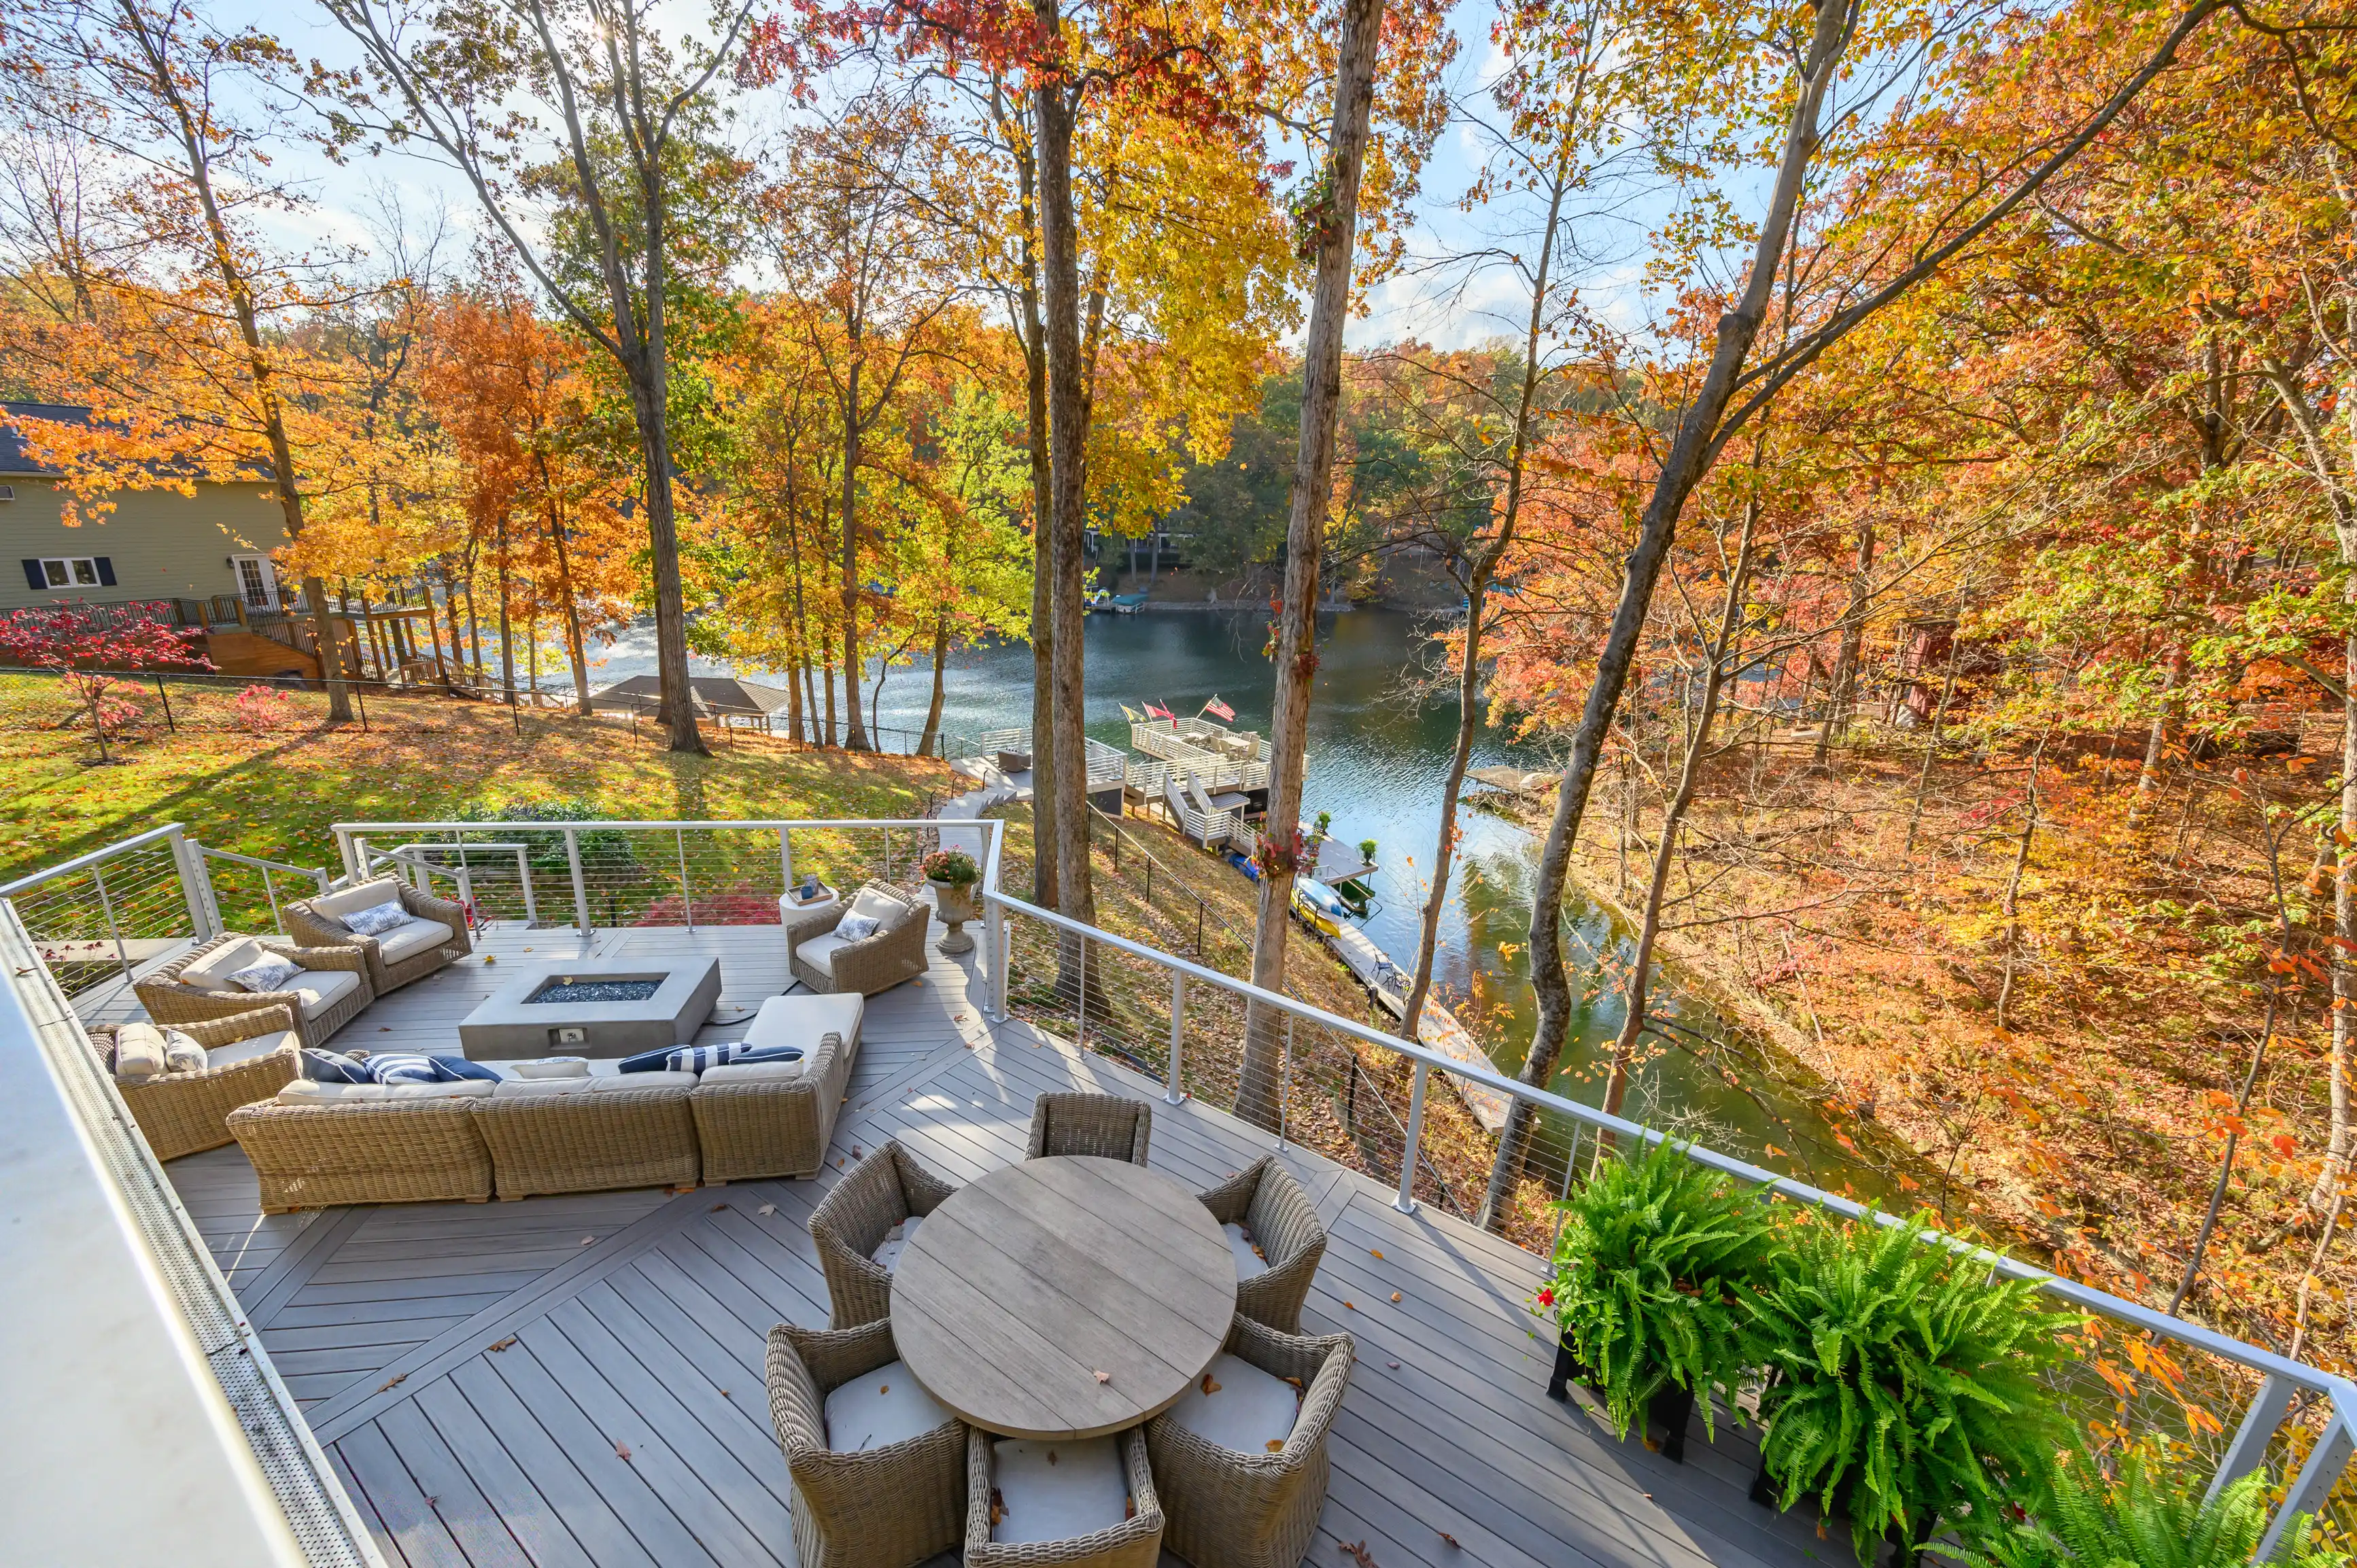 Elevated wooden deck with outdoor furniture overlooking a tranquil lake surrounded by autumn-colored trees.